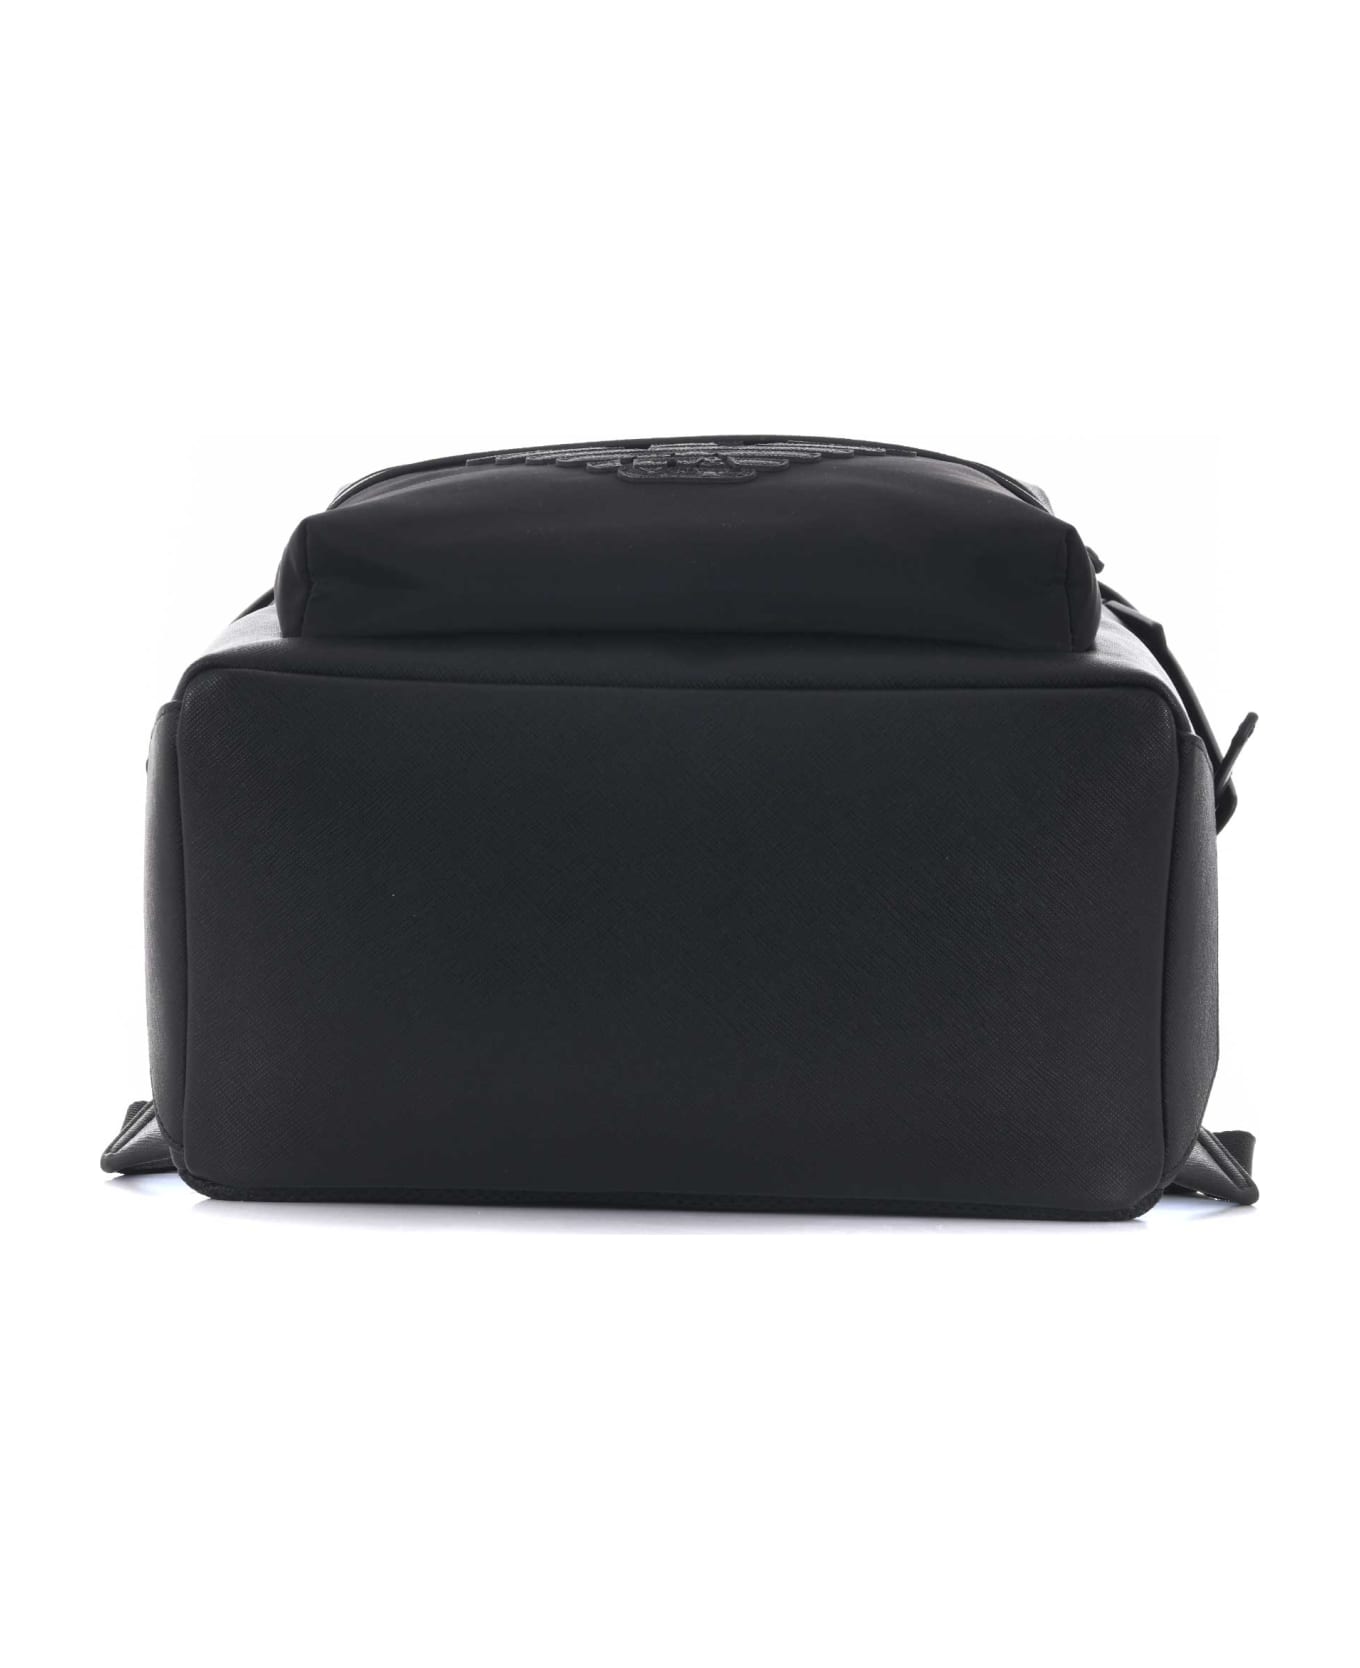 Emporio Armani Backpack From The 'sustainable' Collection - Nero